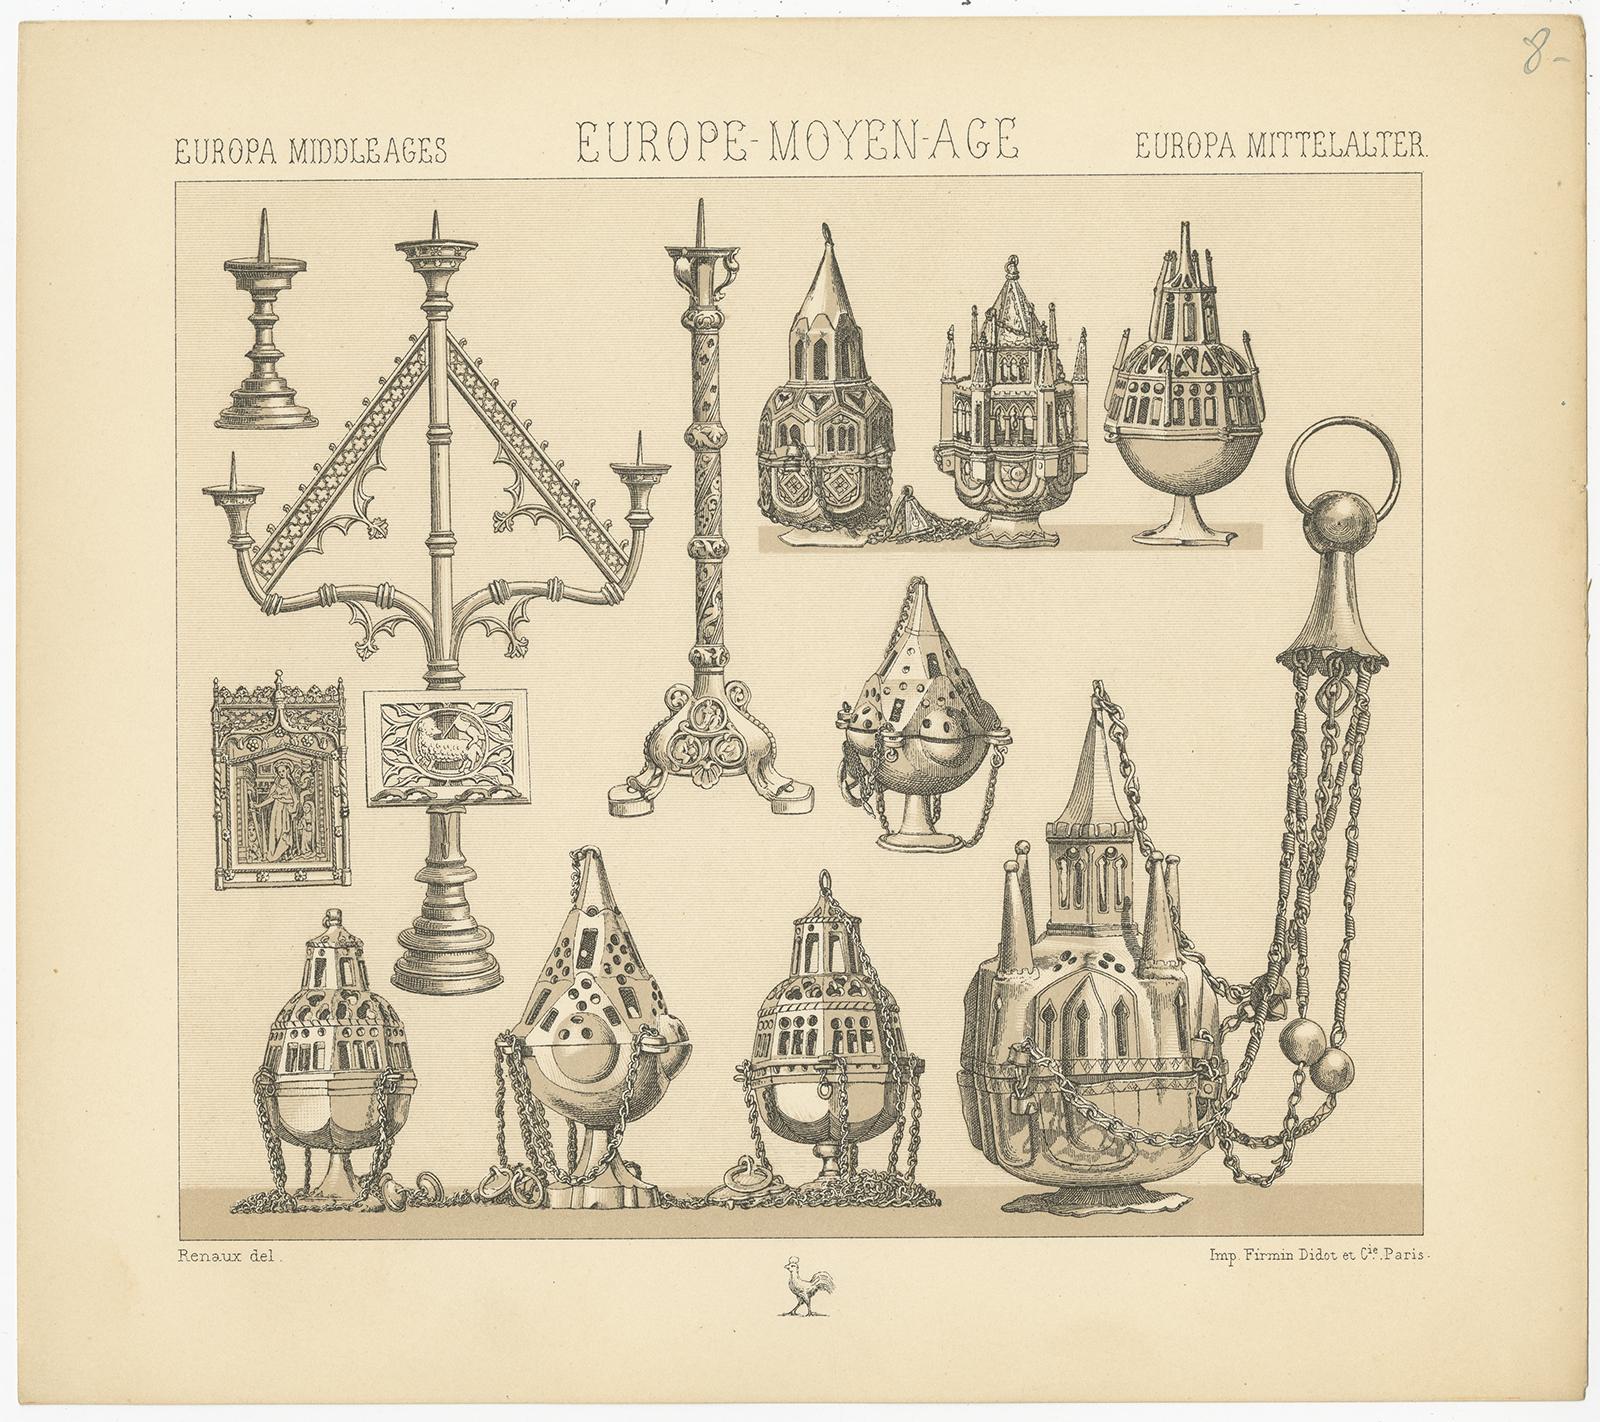 Antique print titled 'Europa Middle Ages - Europe Moyen Age - Europa Mittelalter'. Chromolithograph of European Decorative Objects. This print originates from 'Le Costume Historique' by M.A. Racinet. Published circa 1880.